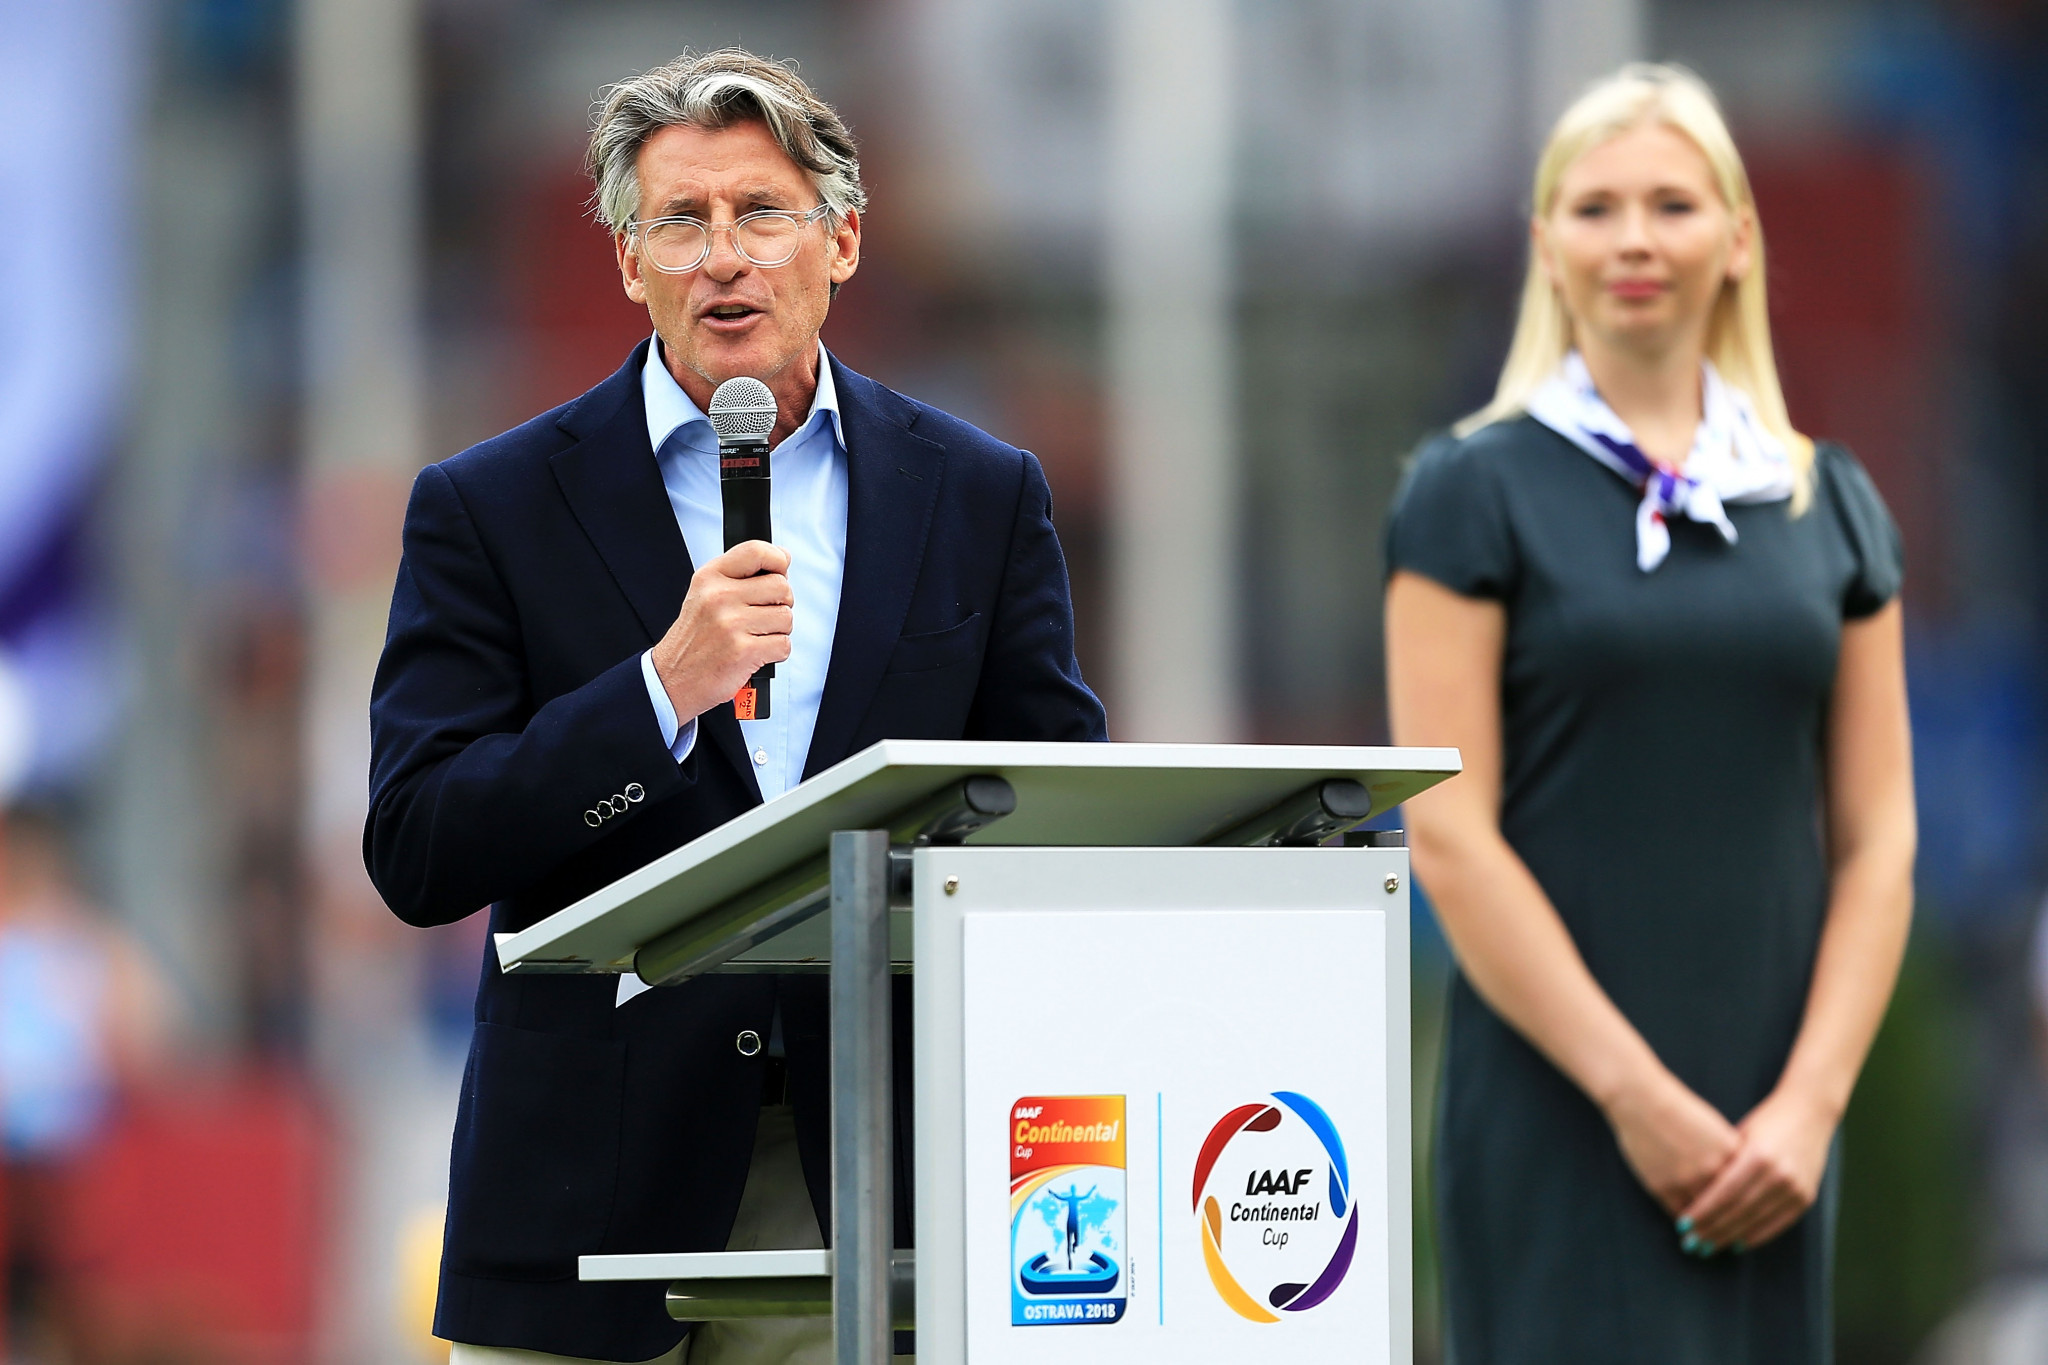 IAAF President Sebastian Coe hopes the Youth Olympics will provide a step towards cross-country being included in the full Olympic programme ©Getty Images